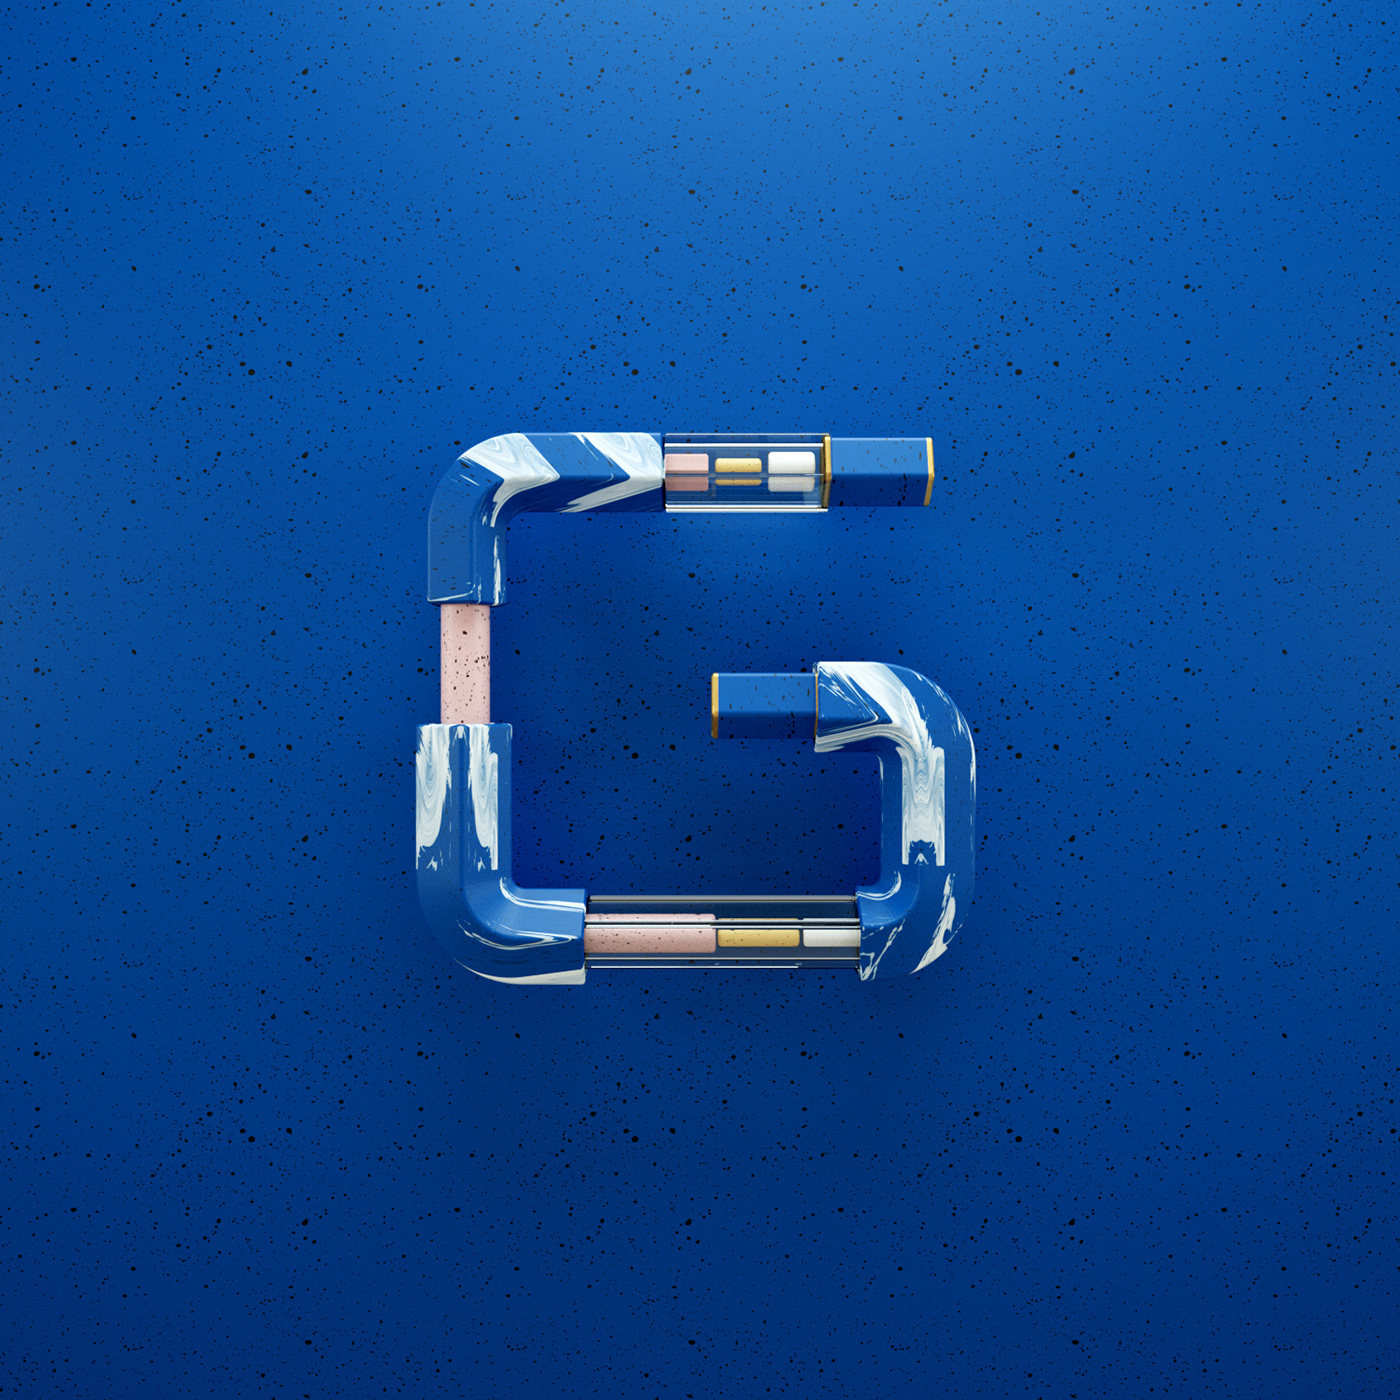 36daysoftype frosted glass paint alphabet tube design 3D gold glass cinema4d